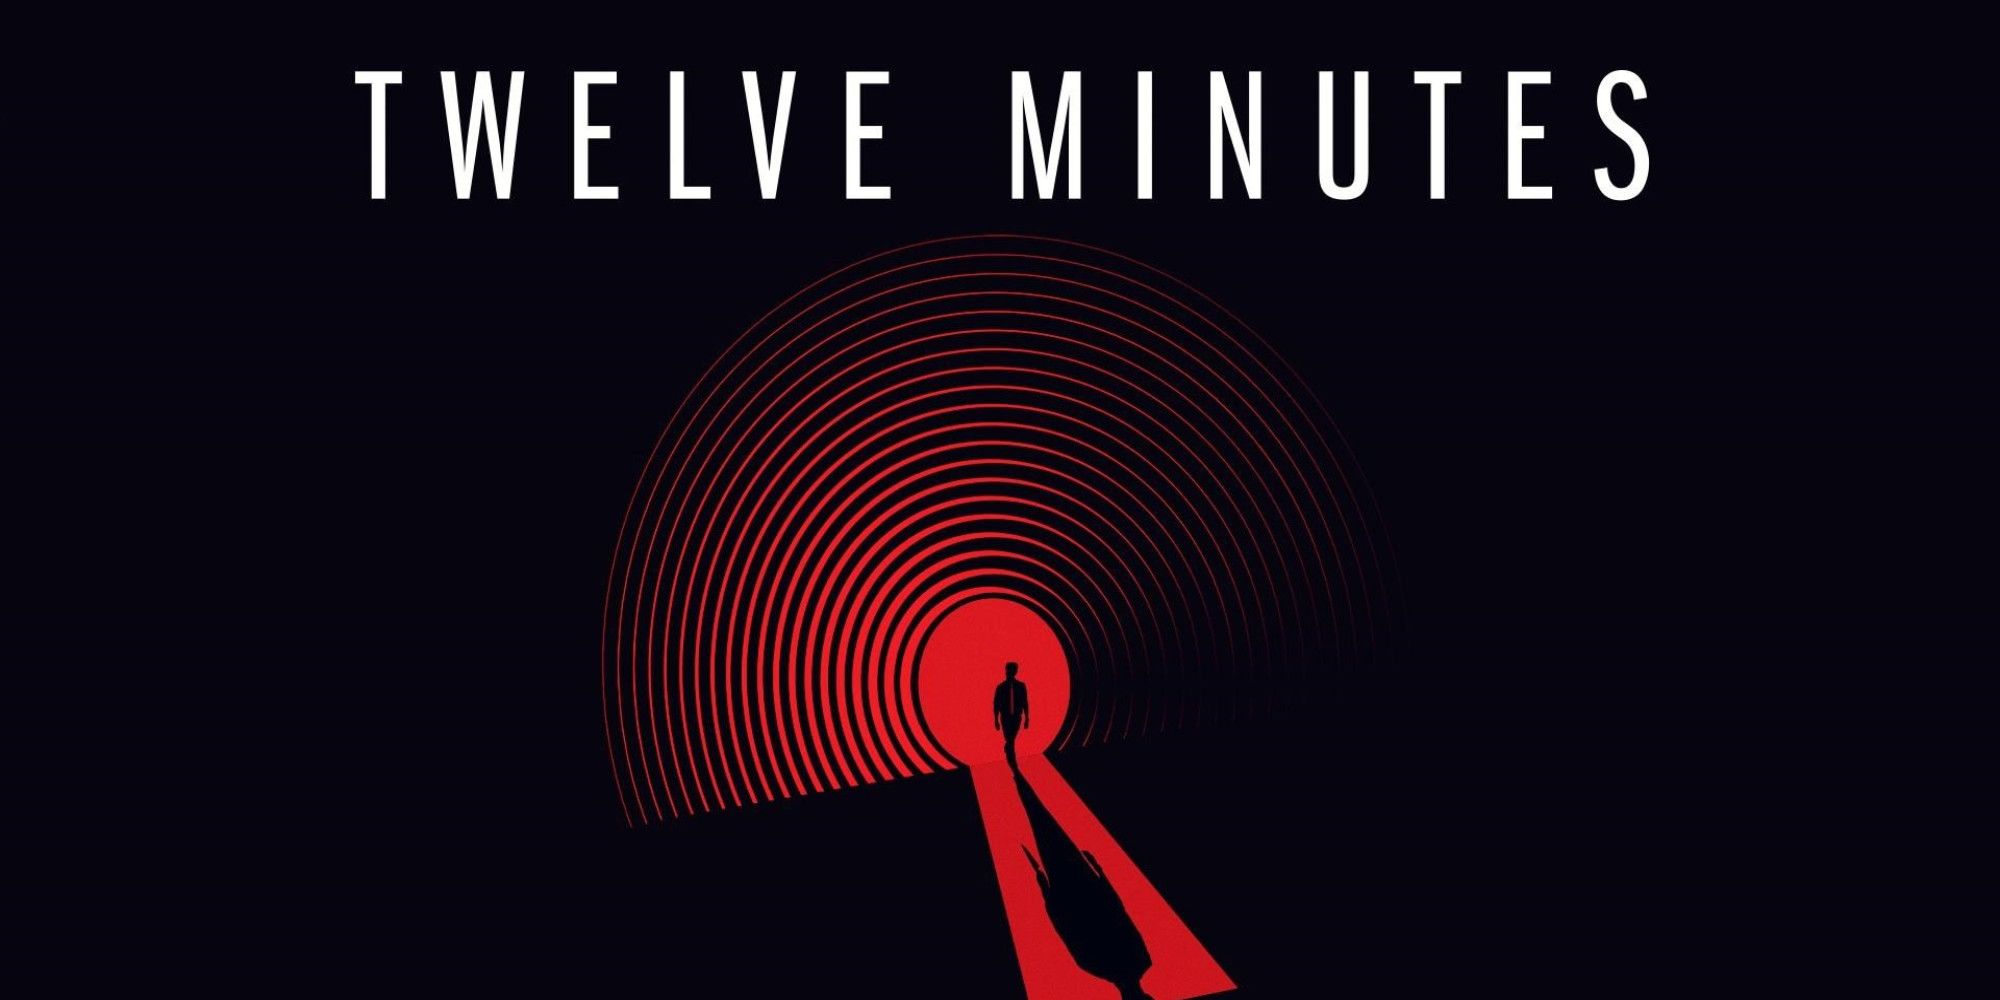 cover art for the game Twelve Minutes featuring a silhouetted person walking into a red circle with the shadow cast behind them and the game's title at the top